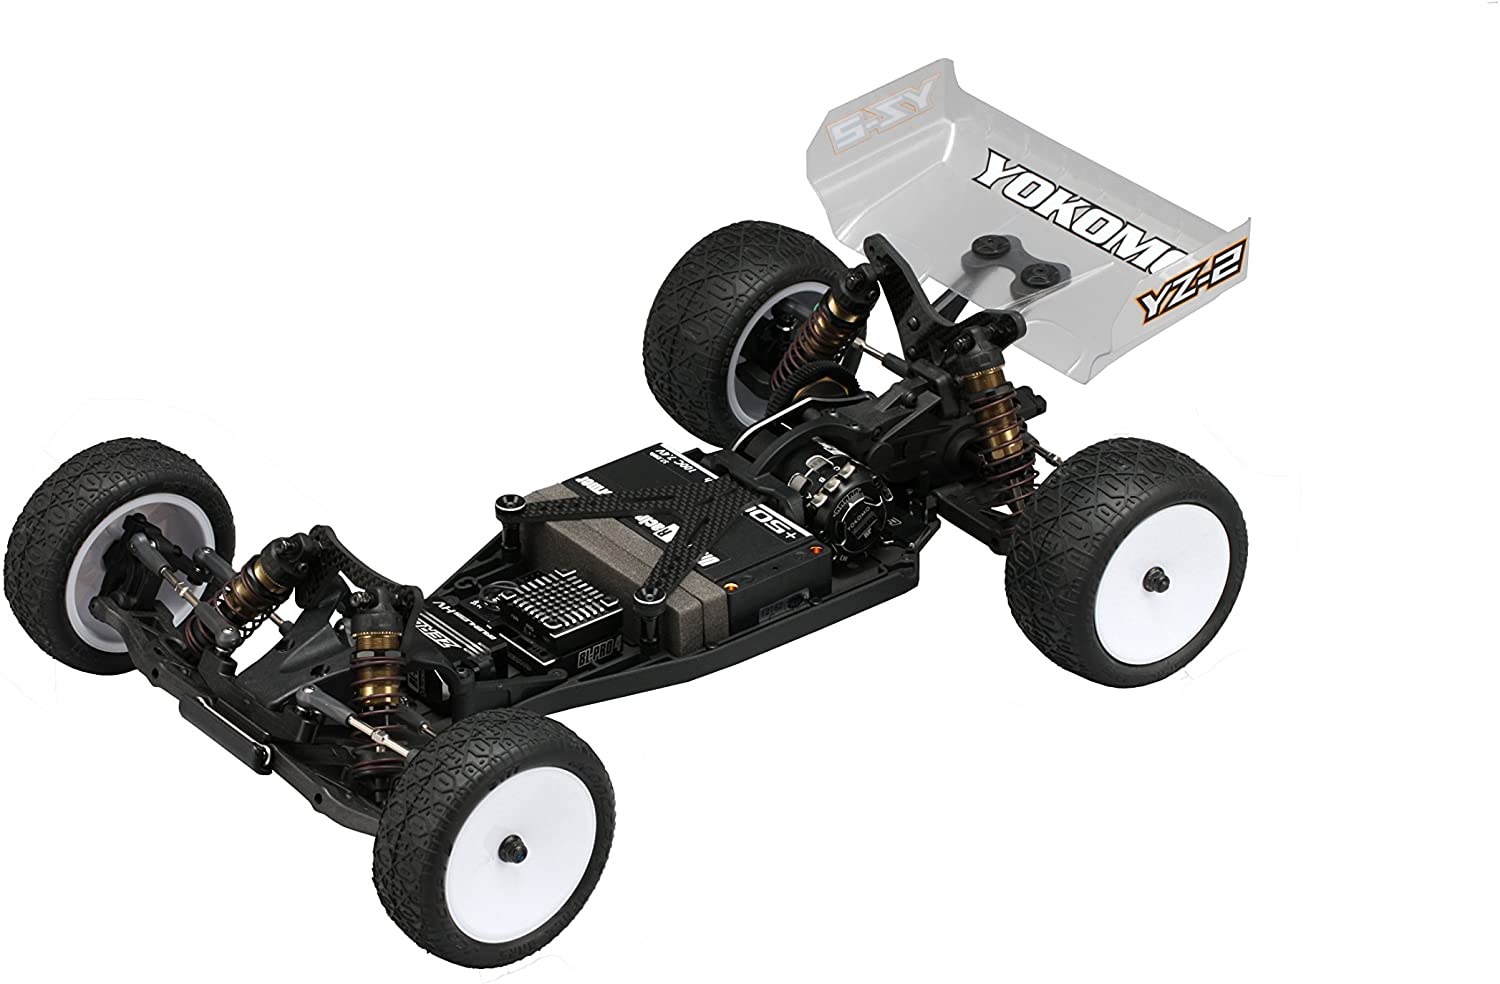 B-YZ2DTM2 2WD Off-Road car YZ-2 DTM2 (for Dirt surface)